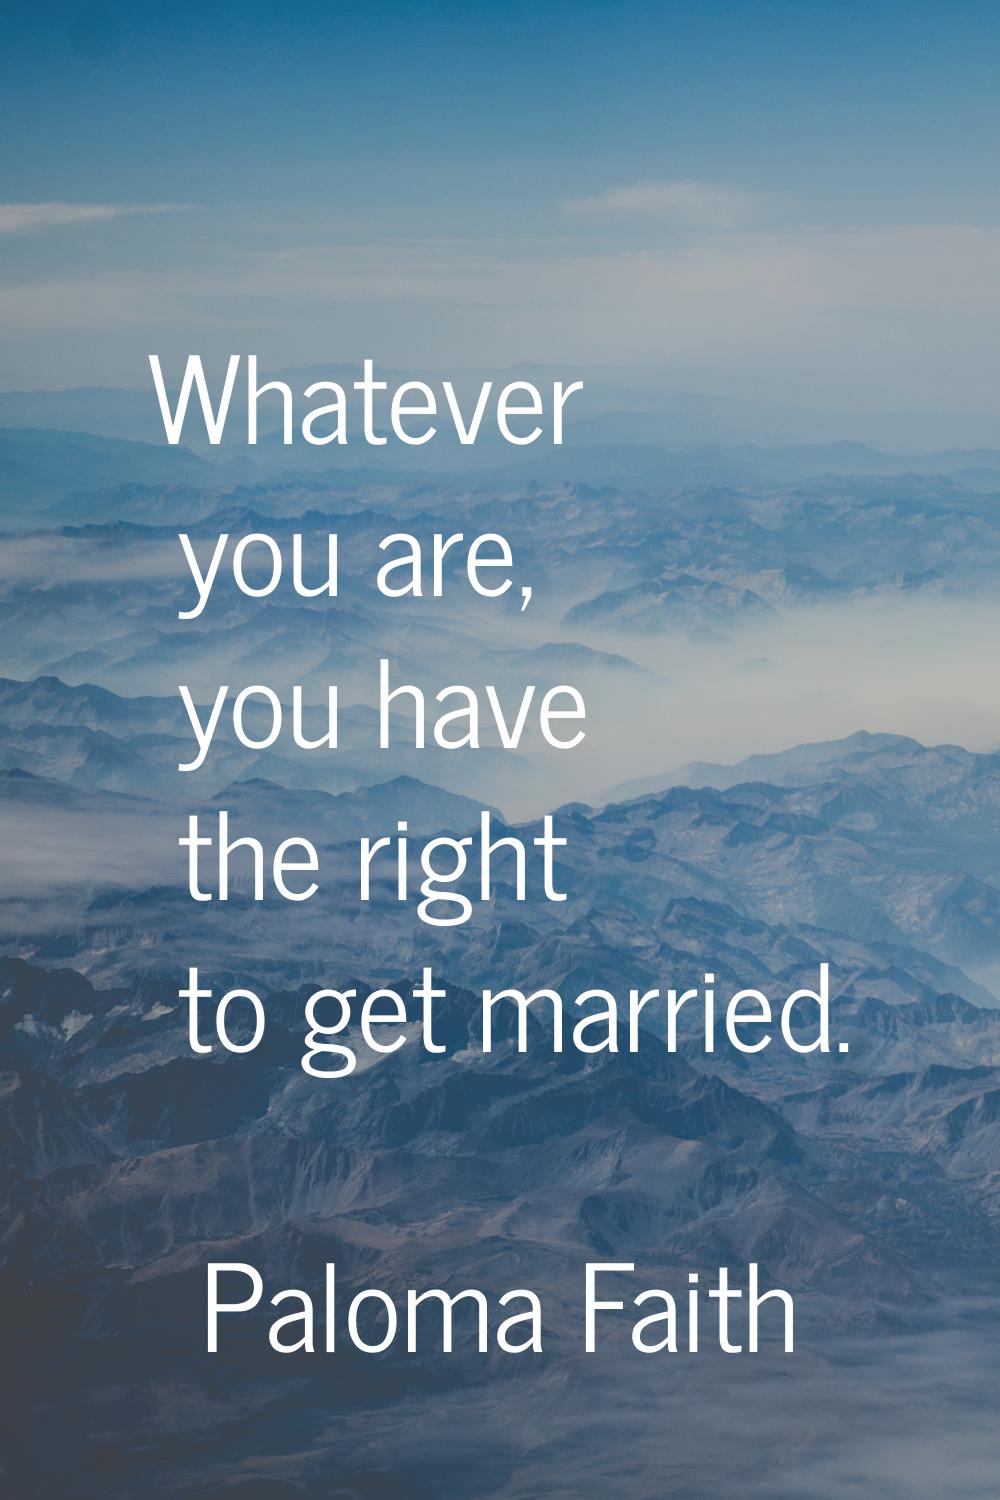 Whatever you are, you have the right to get married.